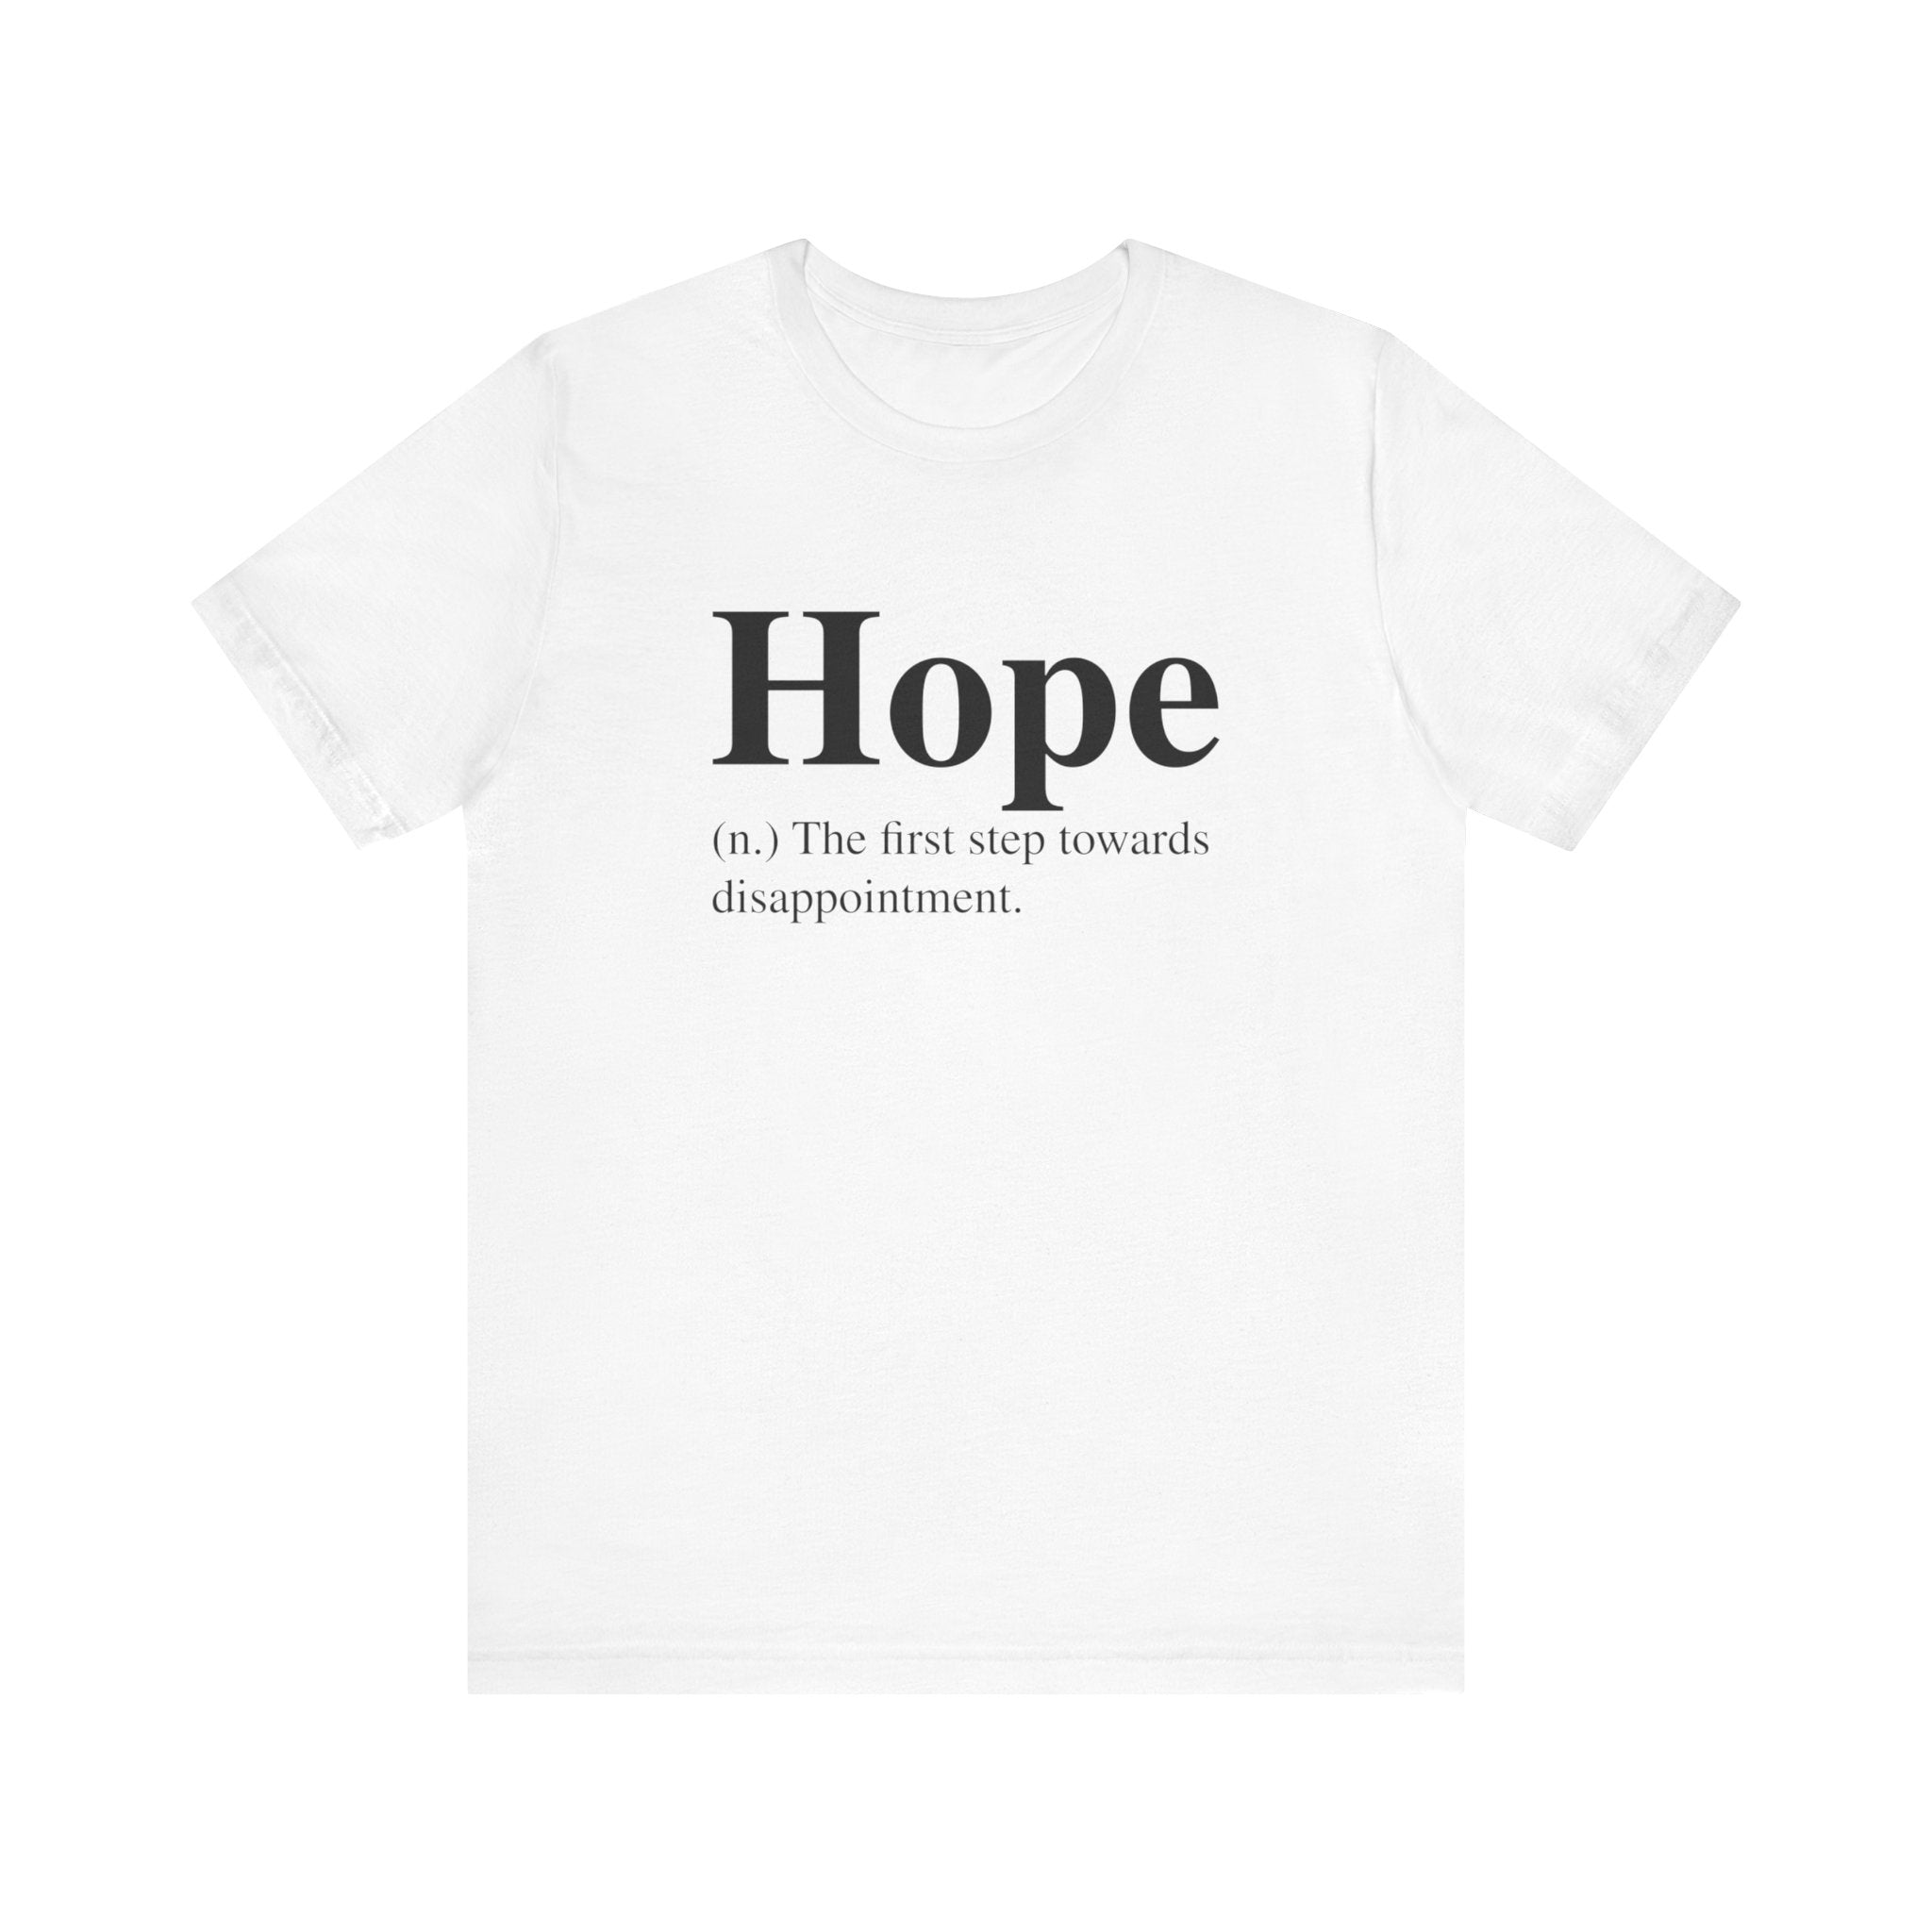 Hope T-Shirt with the word "Hope" and the definition "n. the first step towards disappointment" printed in black text on the front.